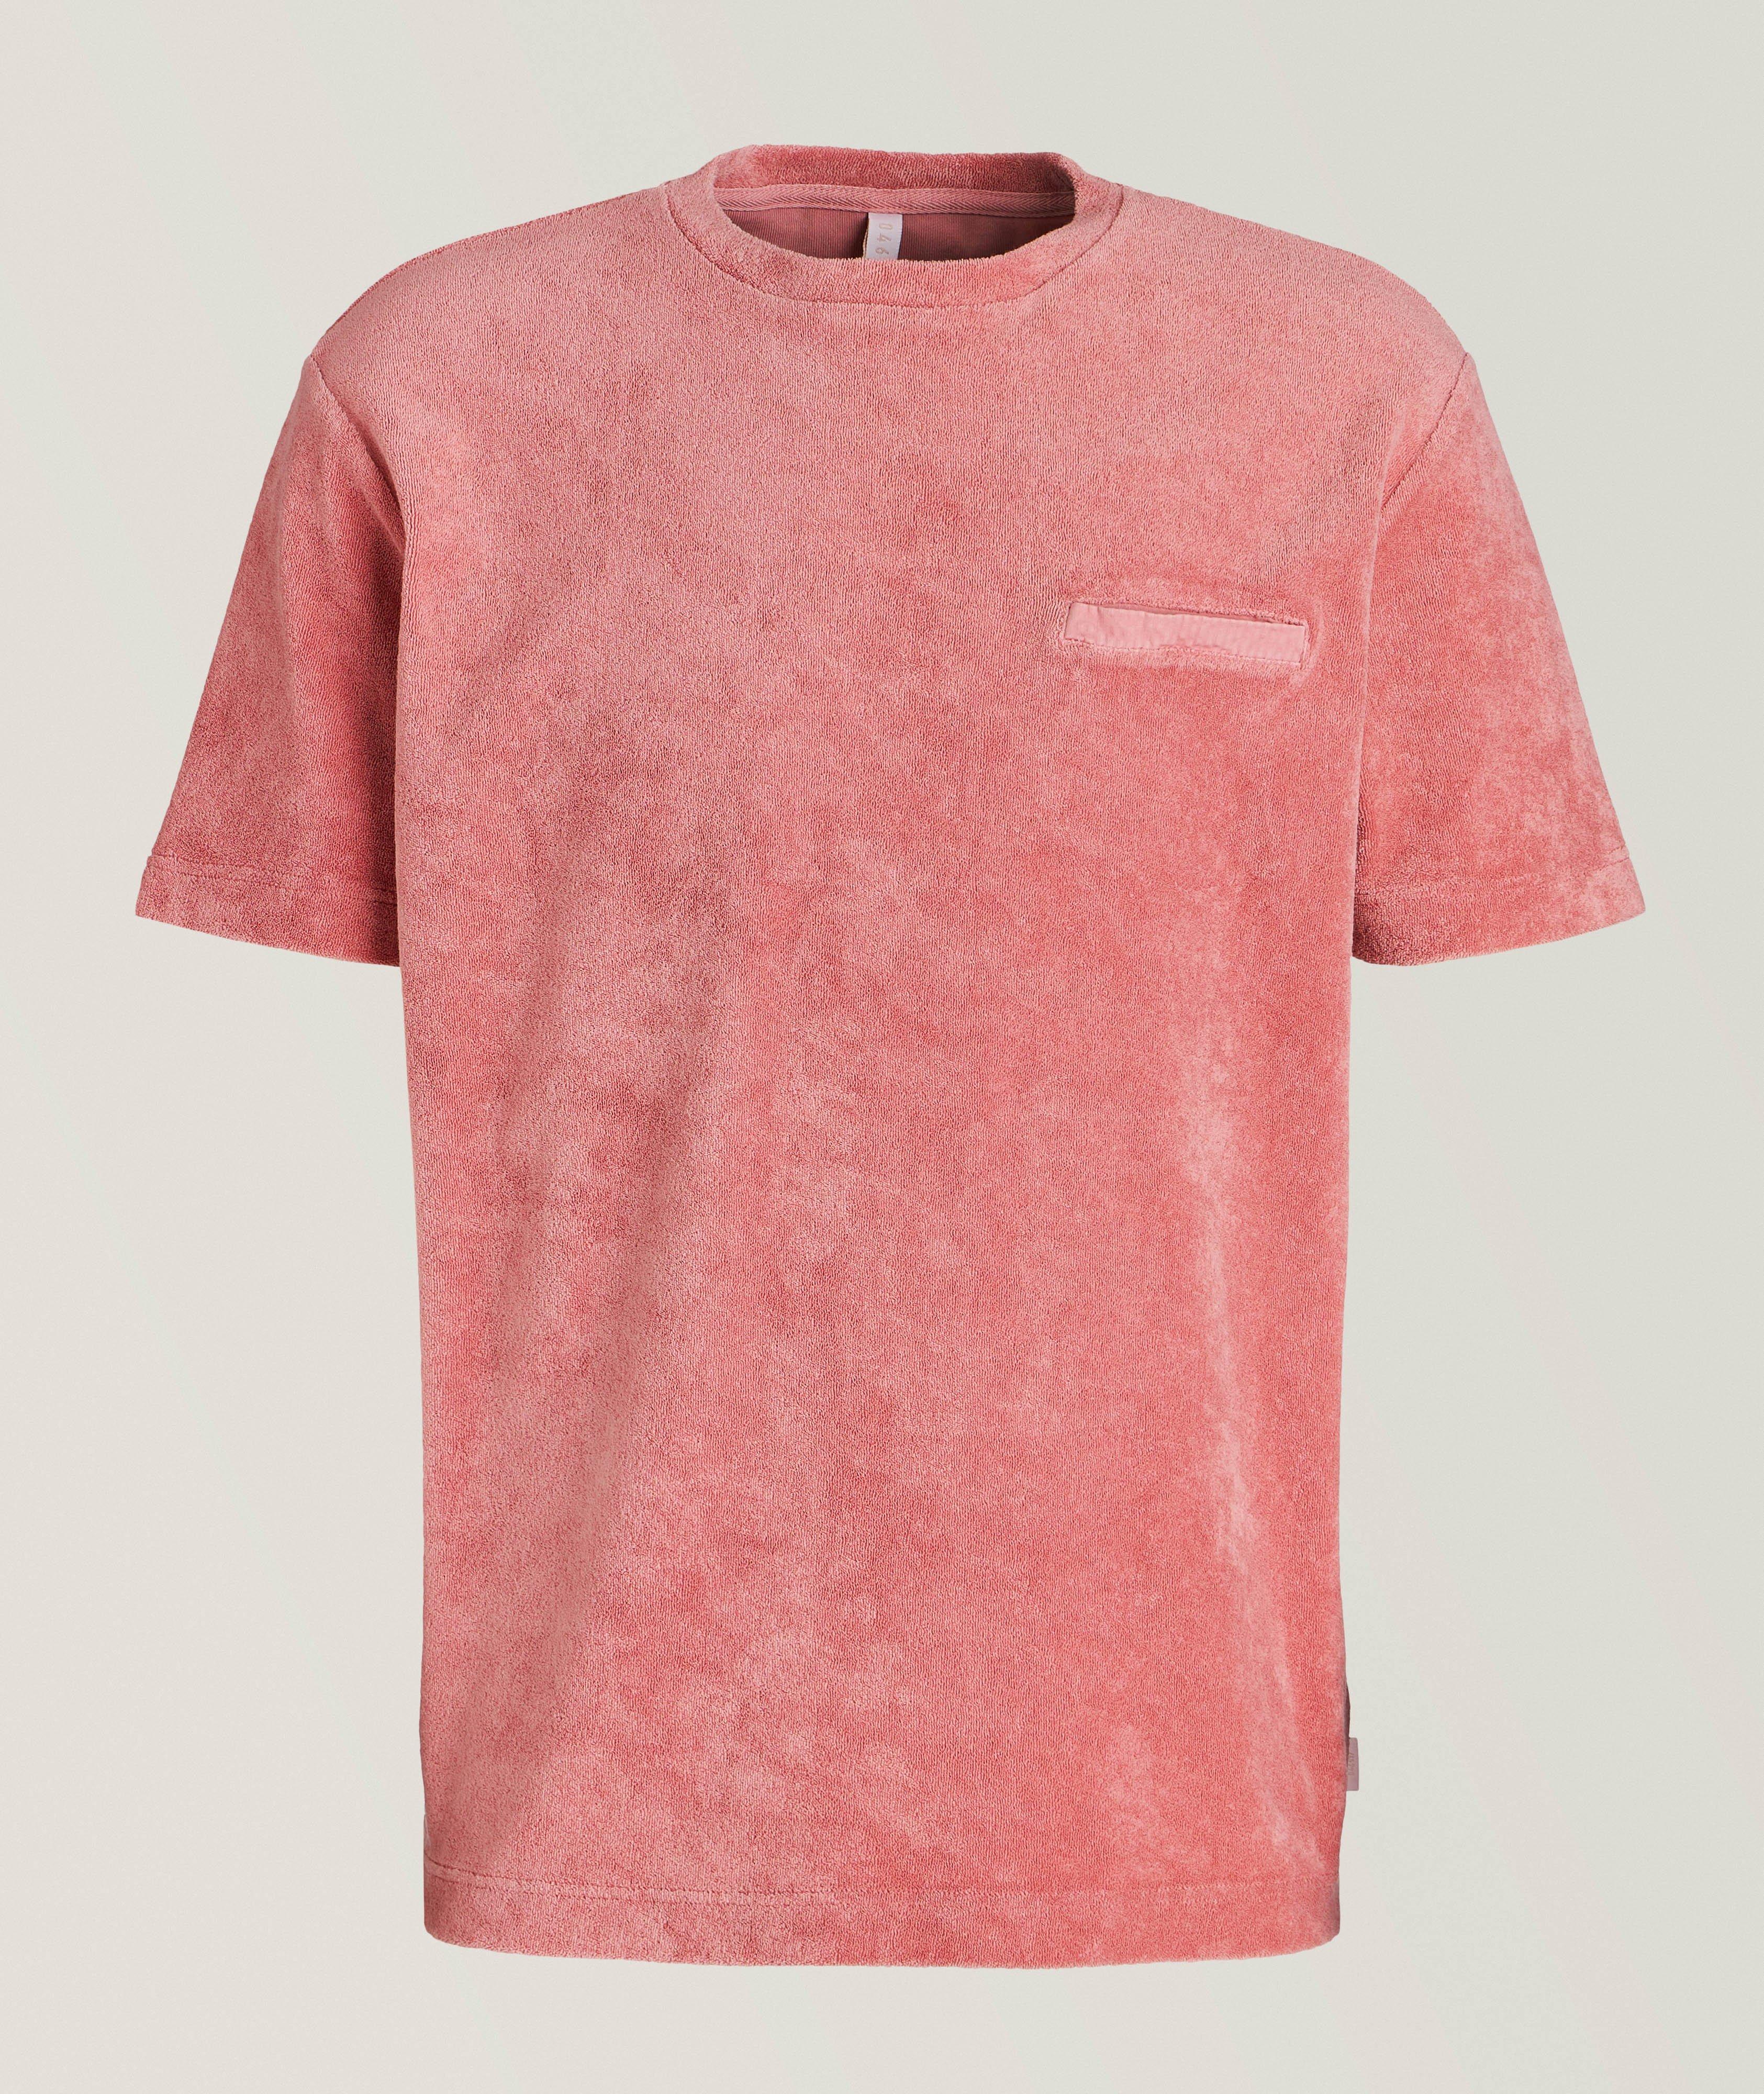 Garment-Dyed Terry Cotton T-Shirt image 0